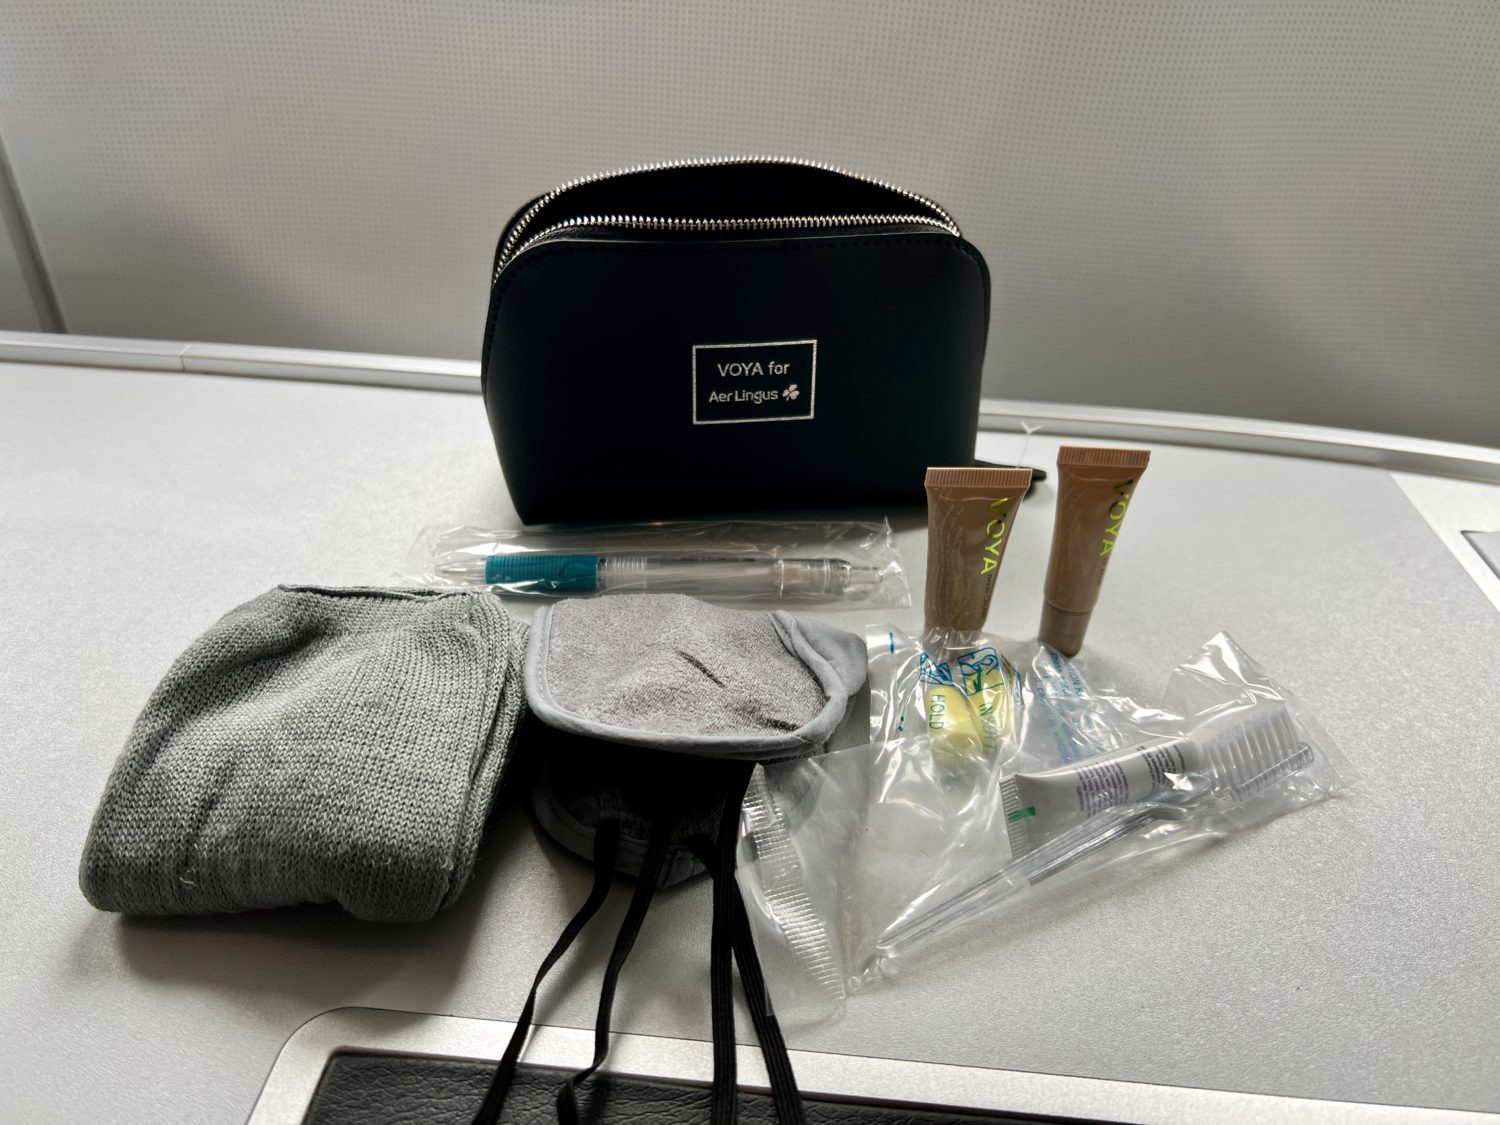 aer lingus business class amenity kit contents